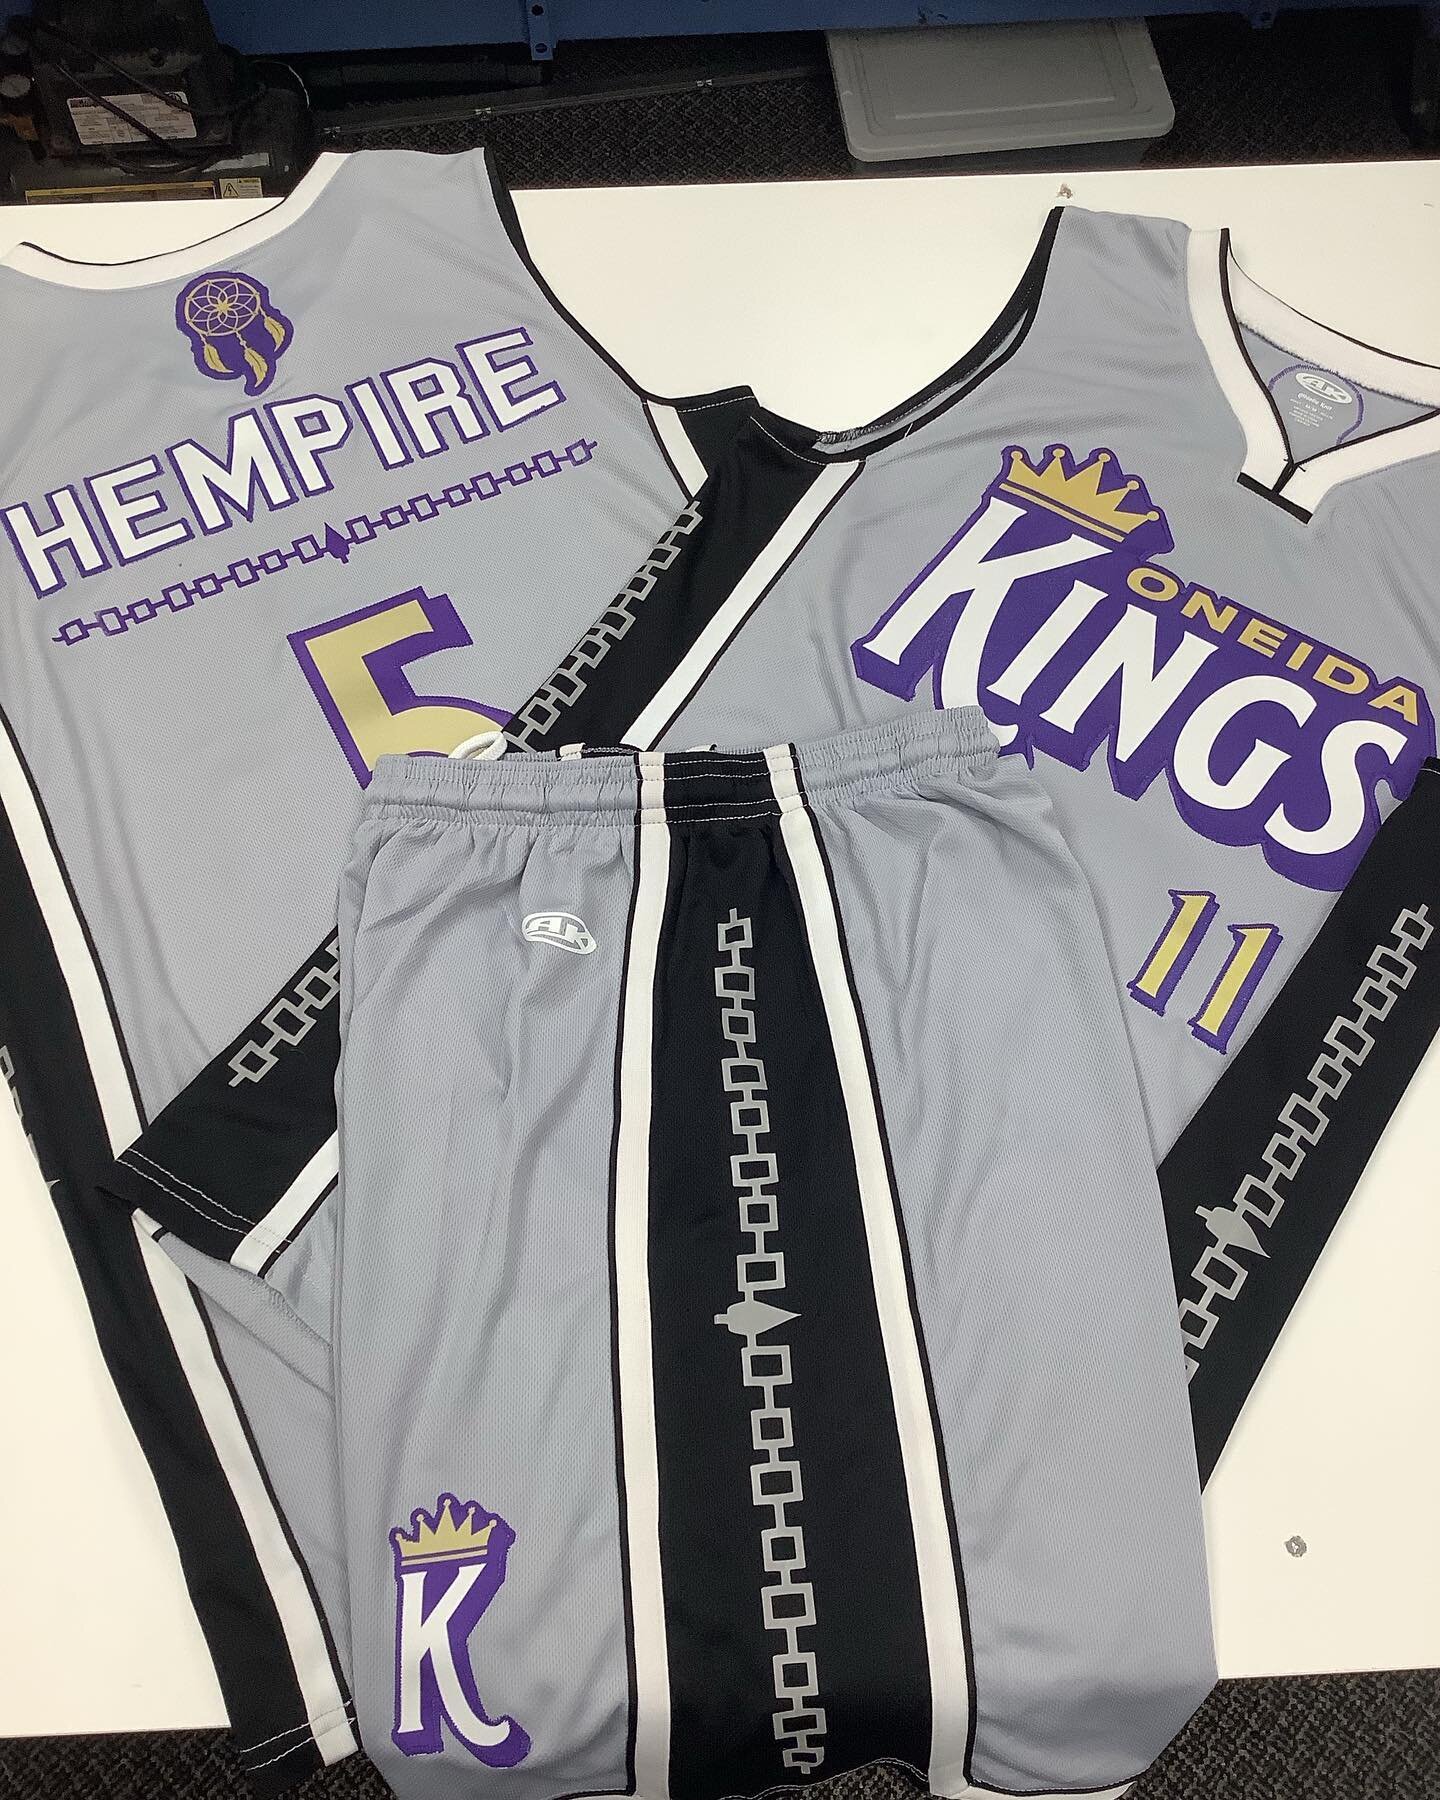 Nothing but net! Who&rsquo;s ready for March madness? Who you all rooting for? Let us know. Thought we show off some basketball uniforms with custom sublimated twill patches and graphics. All hand sewn Tina.
#custombasketball #basketballuniforms #mar